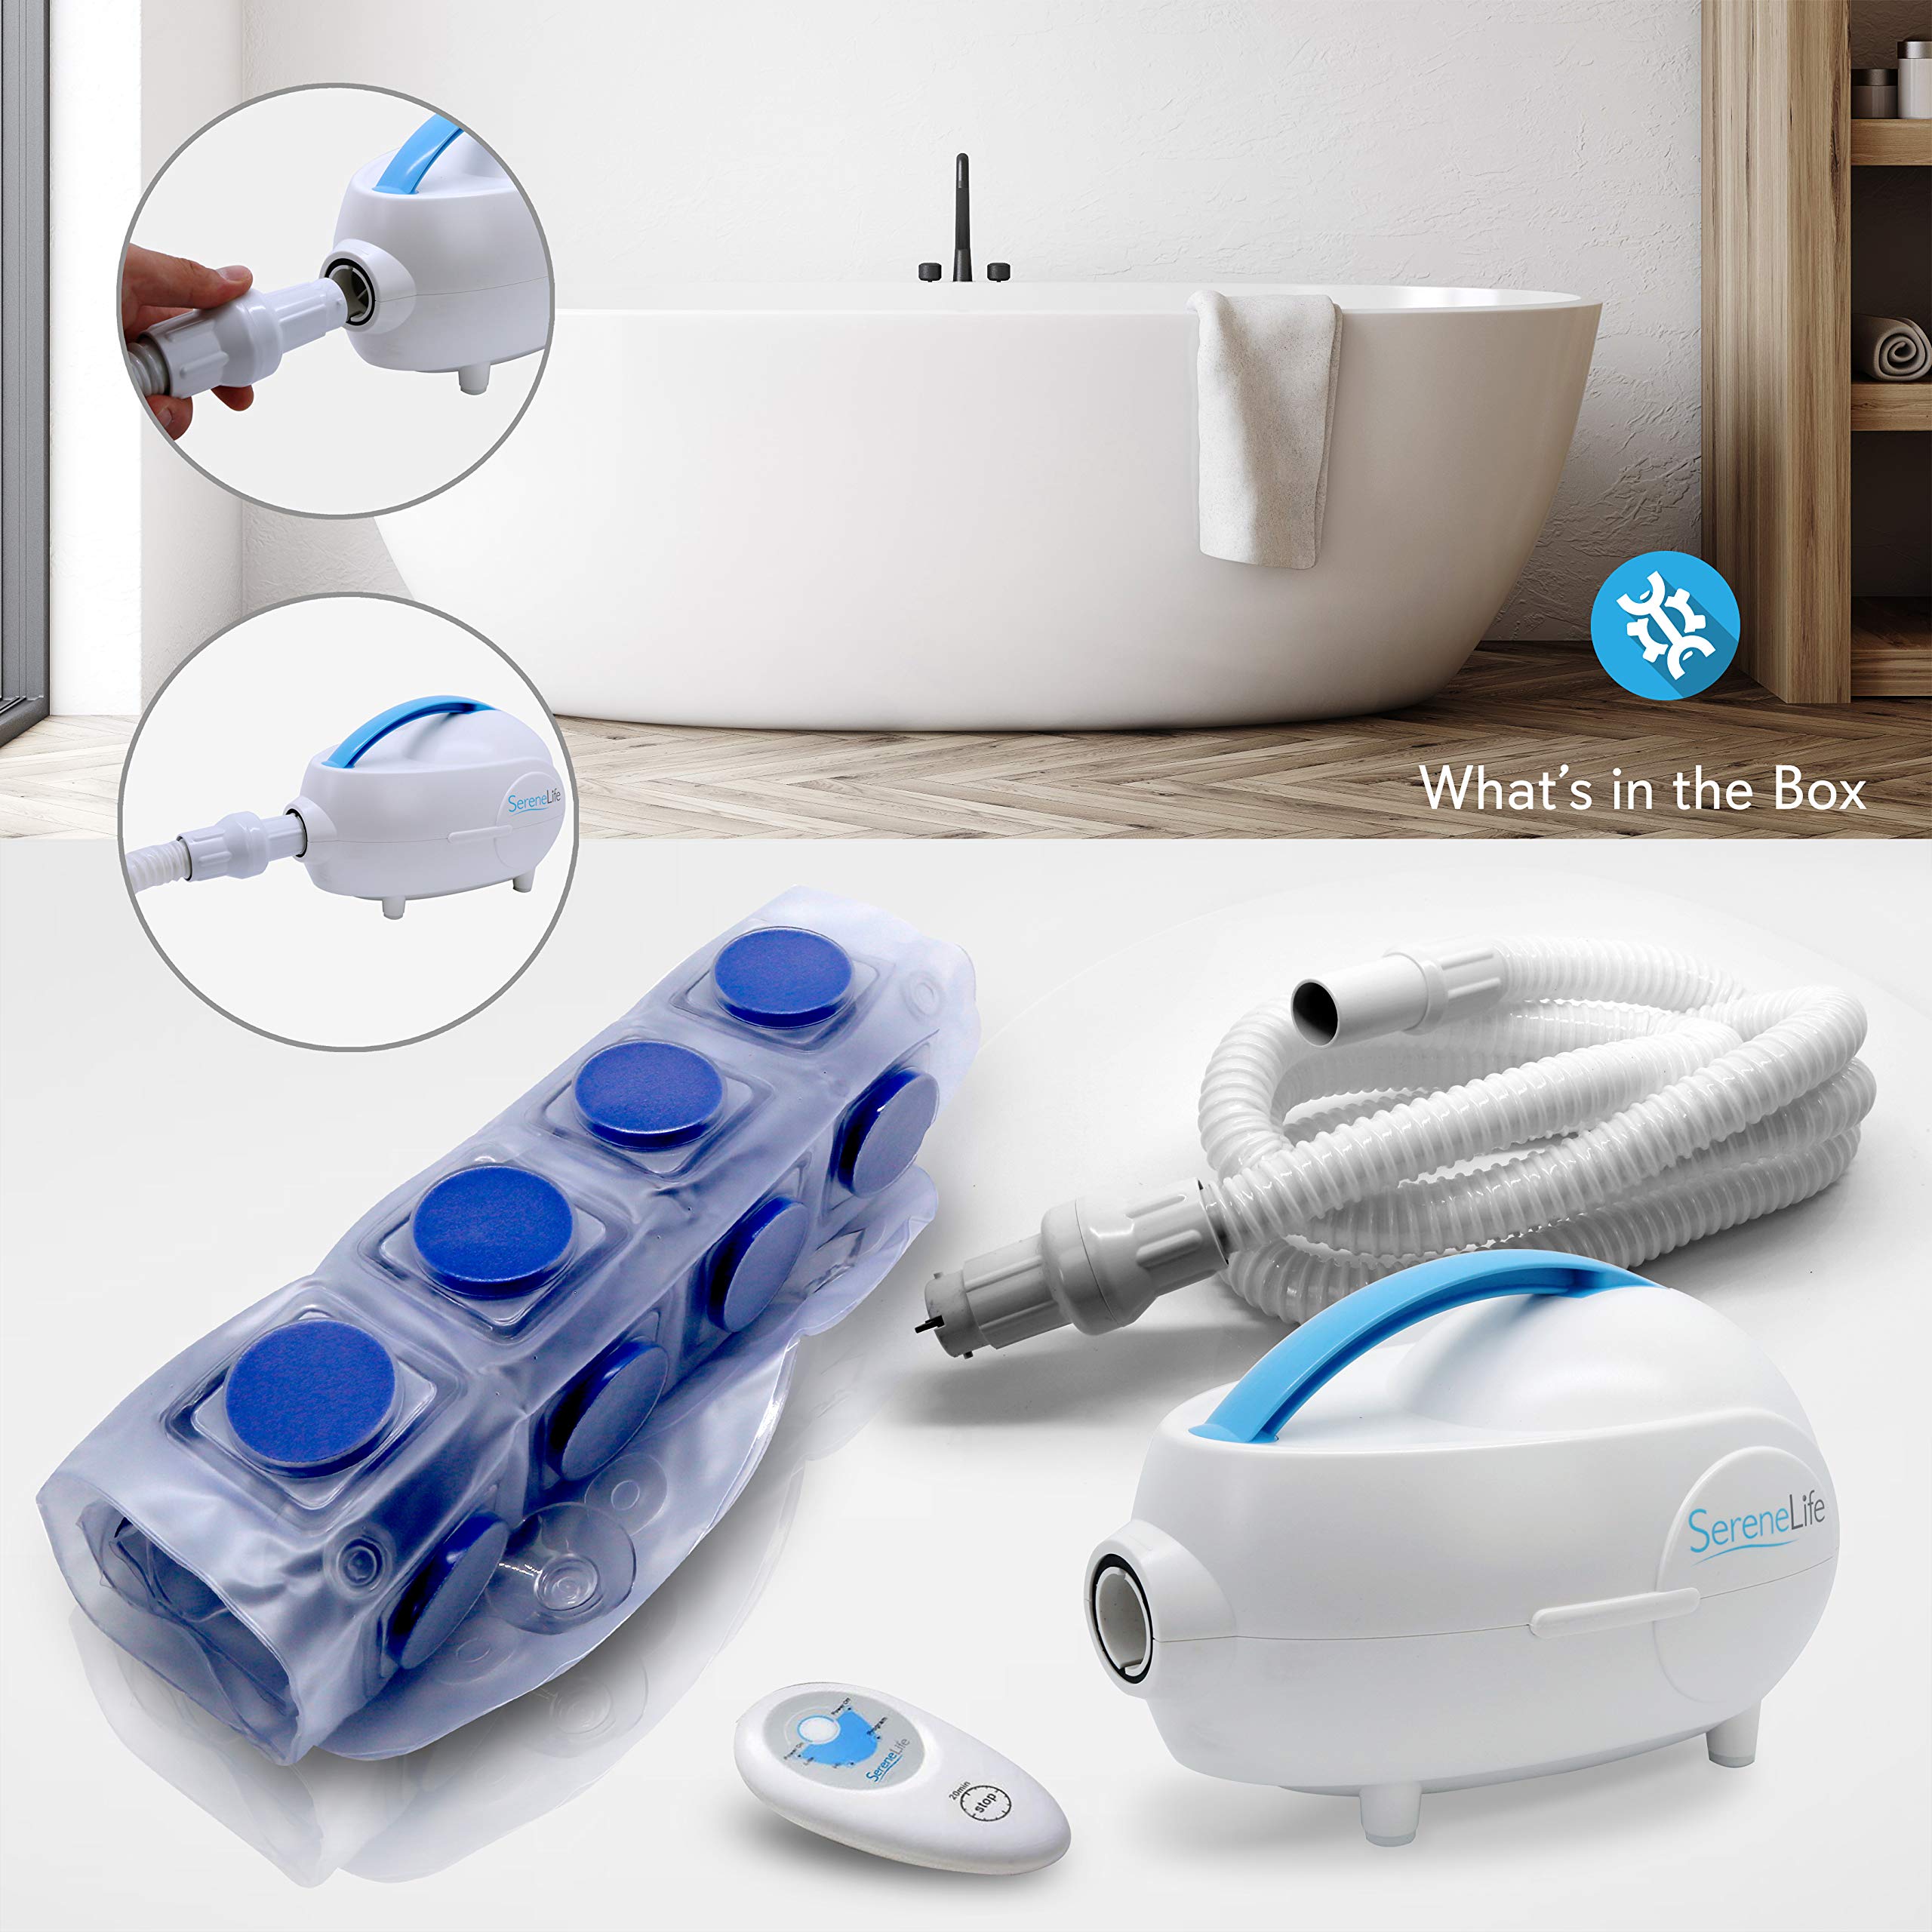 Portable Spa Bubble Bath Massager - Thermal Spa Waterproof Non-Slip Mat with Suction Cup Bottom, Motorized Air Pump & Adjustable Bubble Settings - Remote Control Included - Serenelife AZPHSPAMT24HT